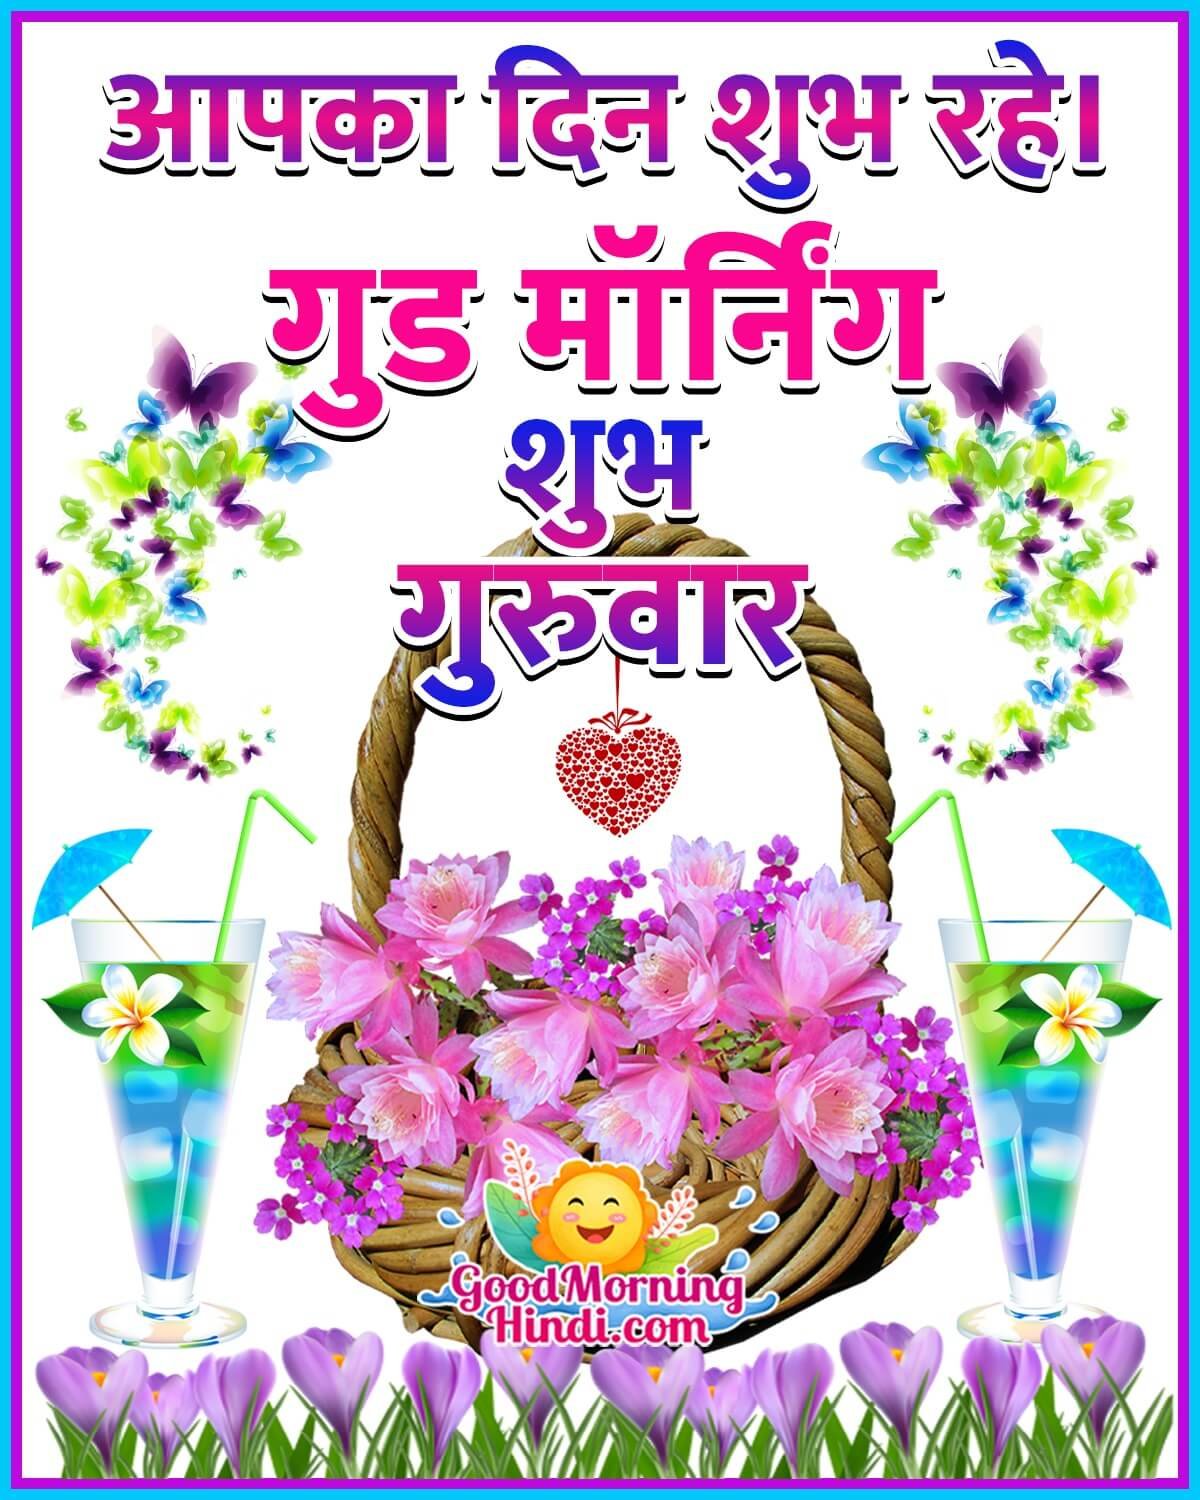 Good Morning Happy Thursday Images In Hindi - Good Morning Wishes ...